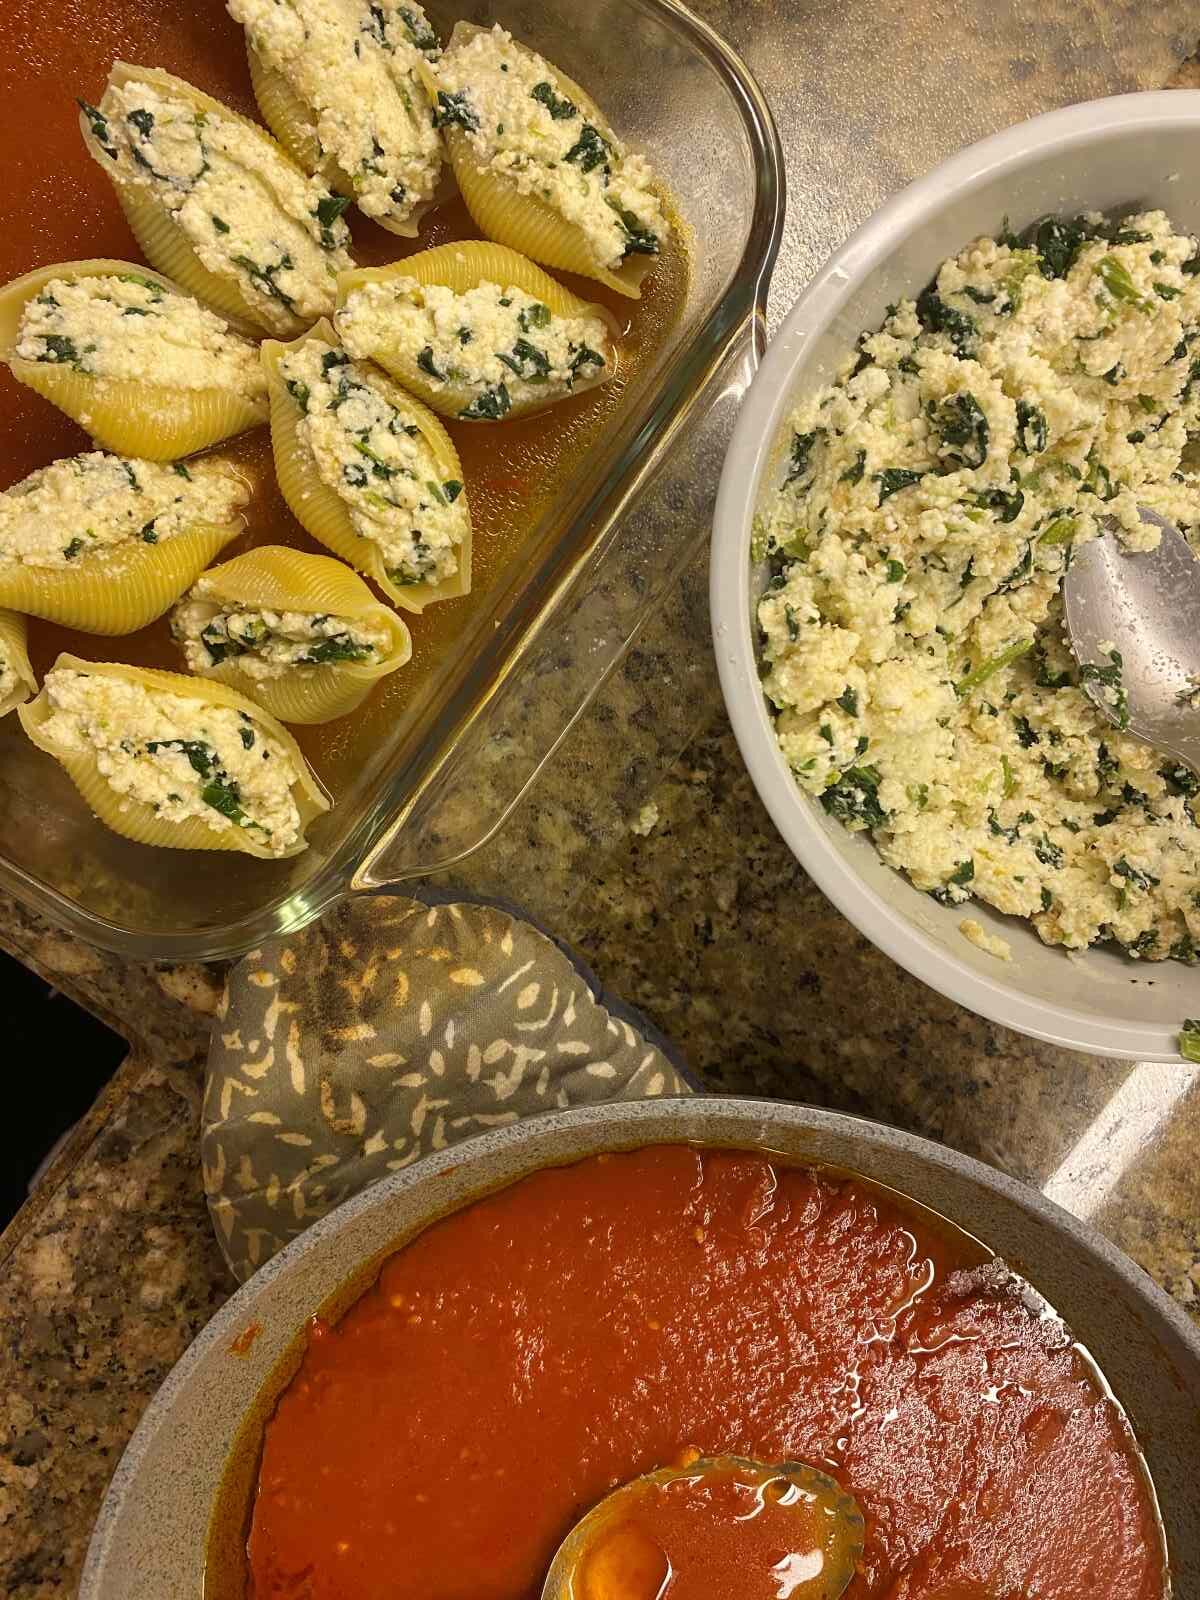 Spinach ricotta stuffing, sauce and stuffed pasta shells on the counter